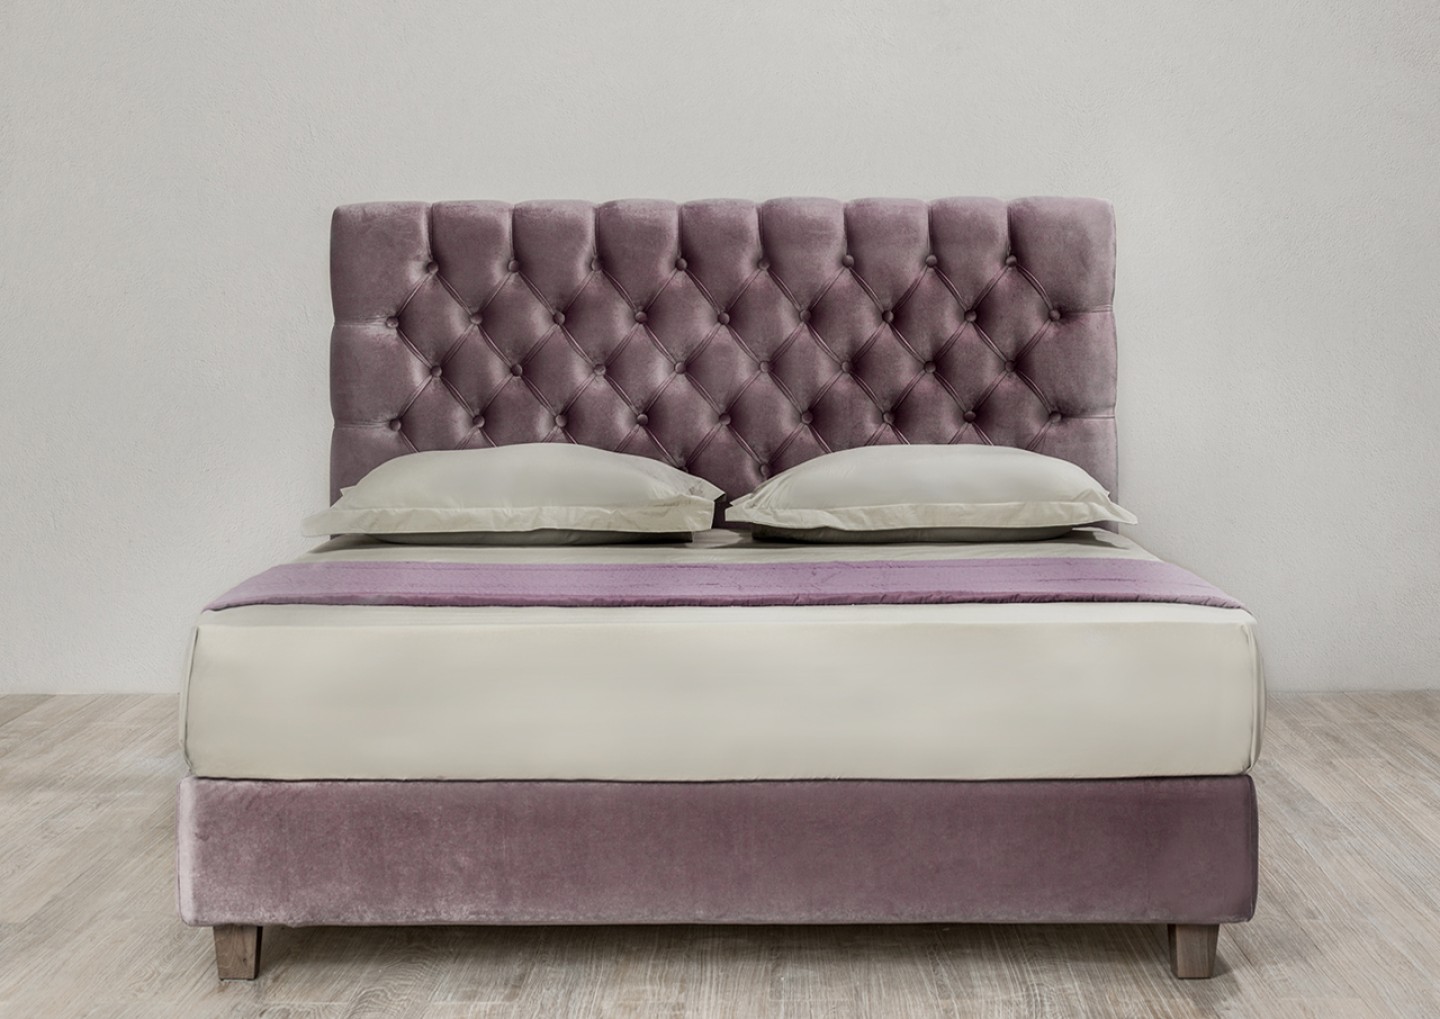 THE QUEEN BED by Elite Strom